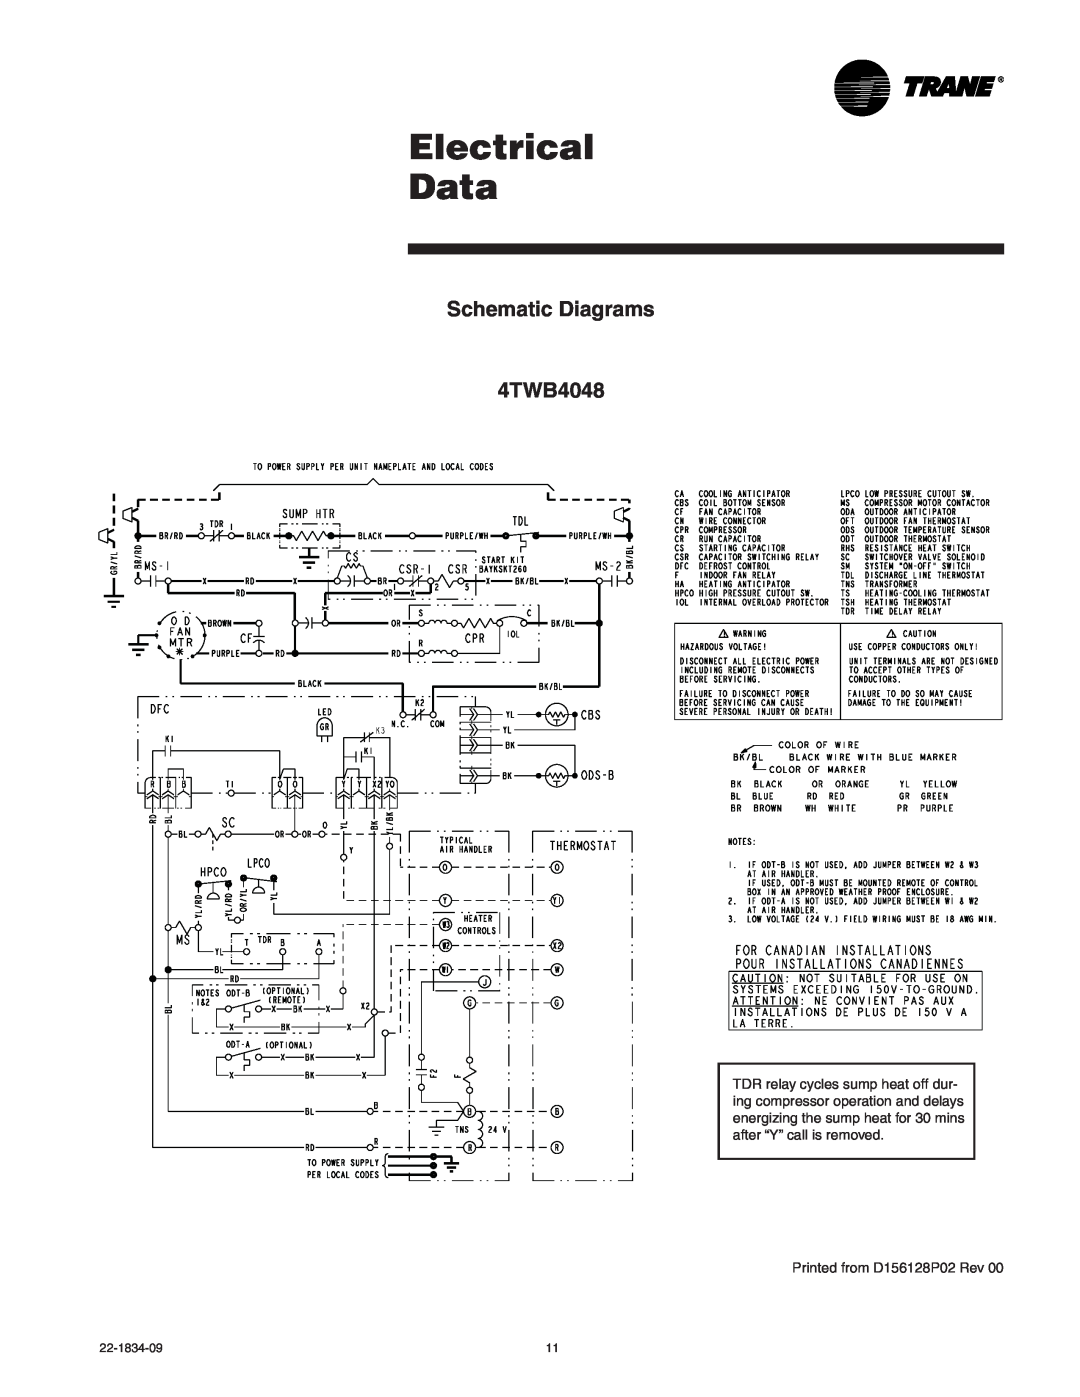 Trane manual Electrical Data, Schematic Diagrams 4TWB4048, Printed from D156128P02 Rev 